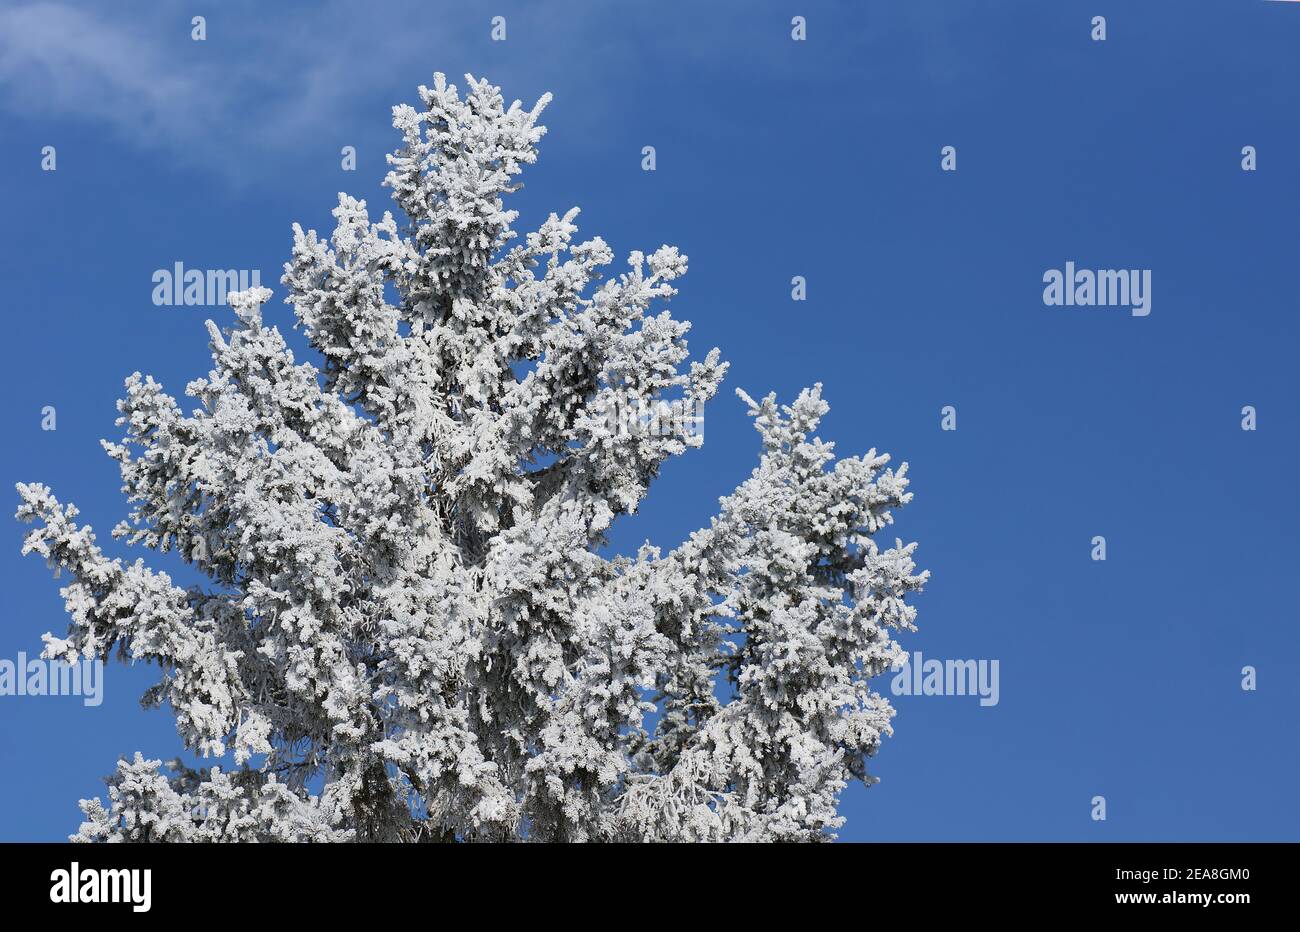 Spruce tree with light snow cover and blue sky Stock Photo